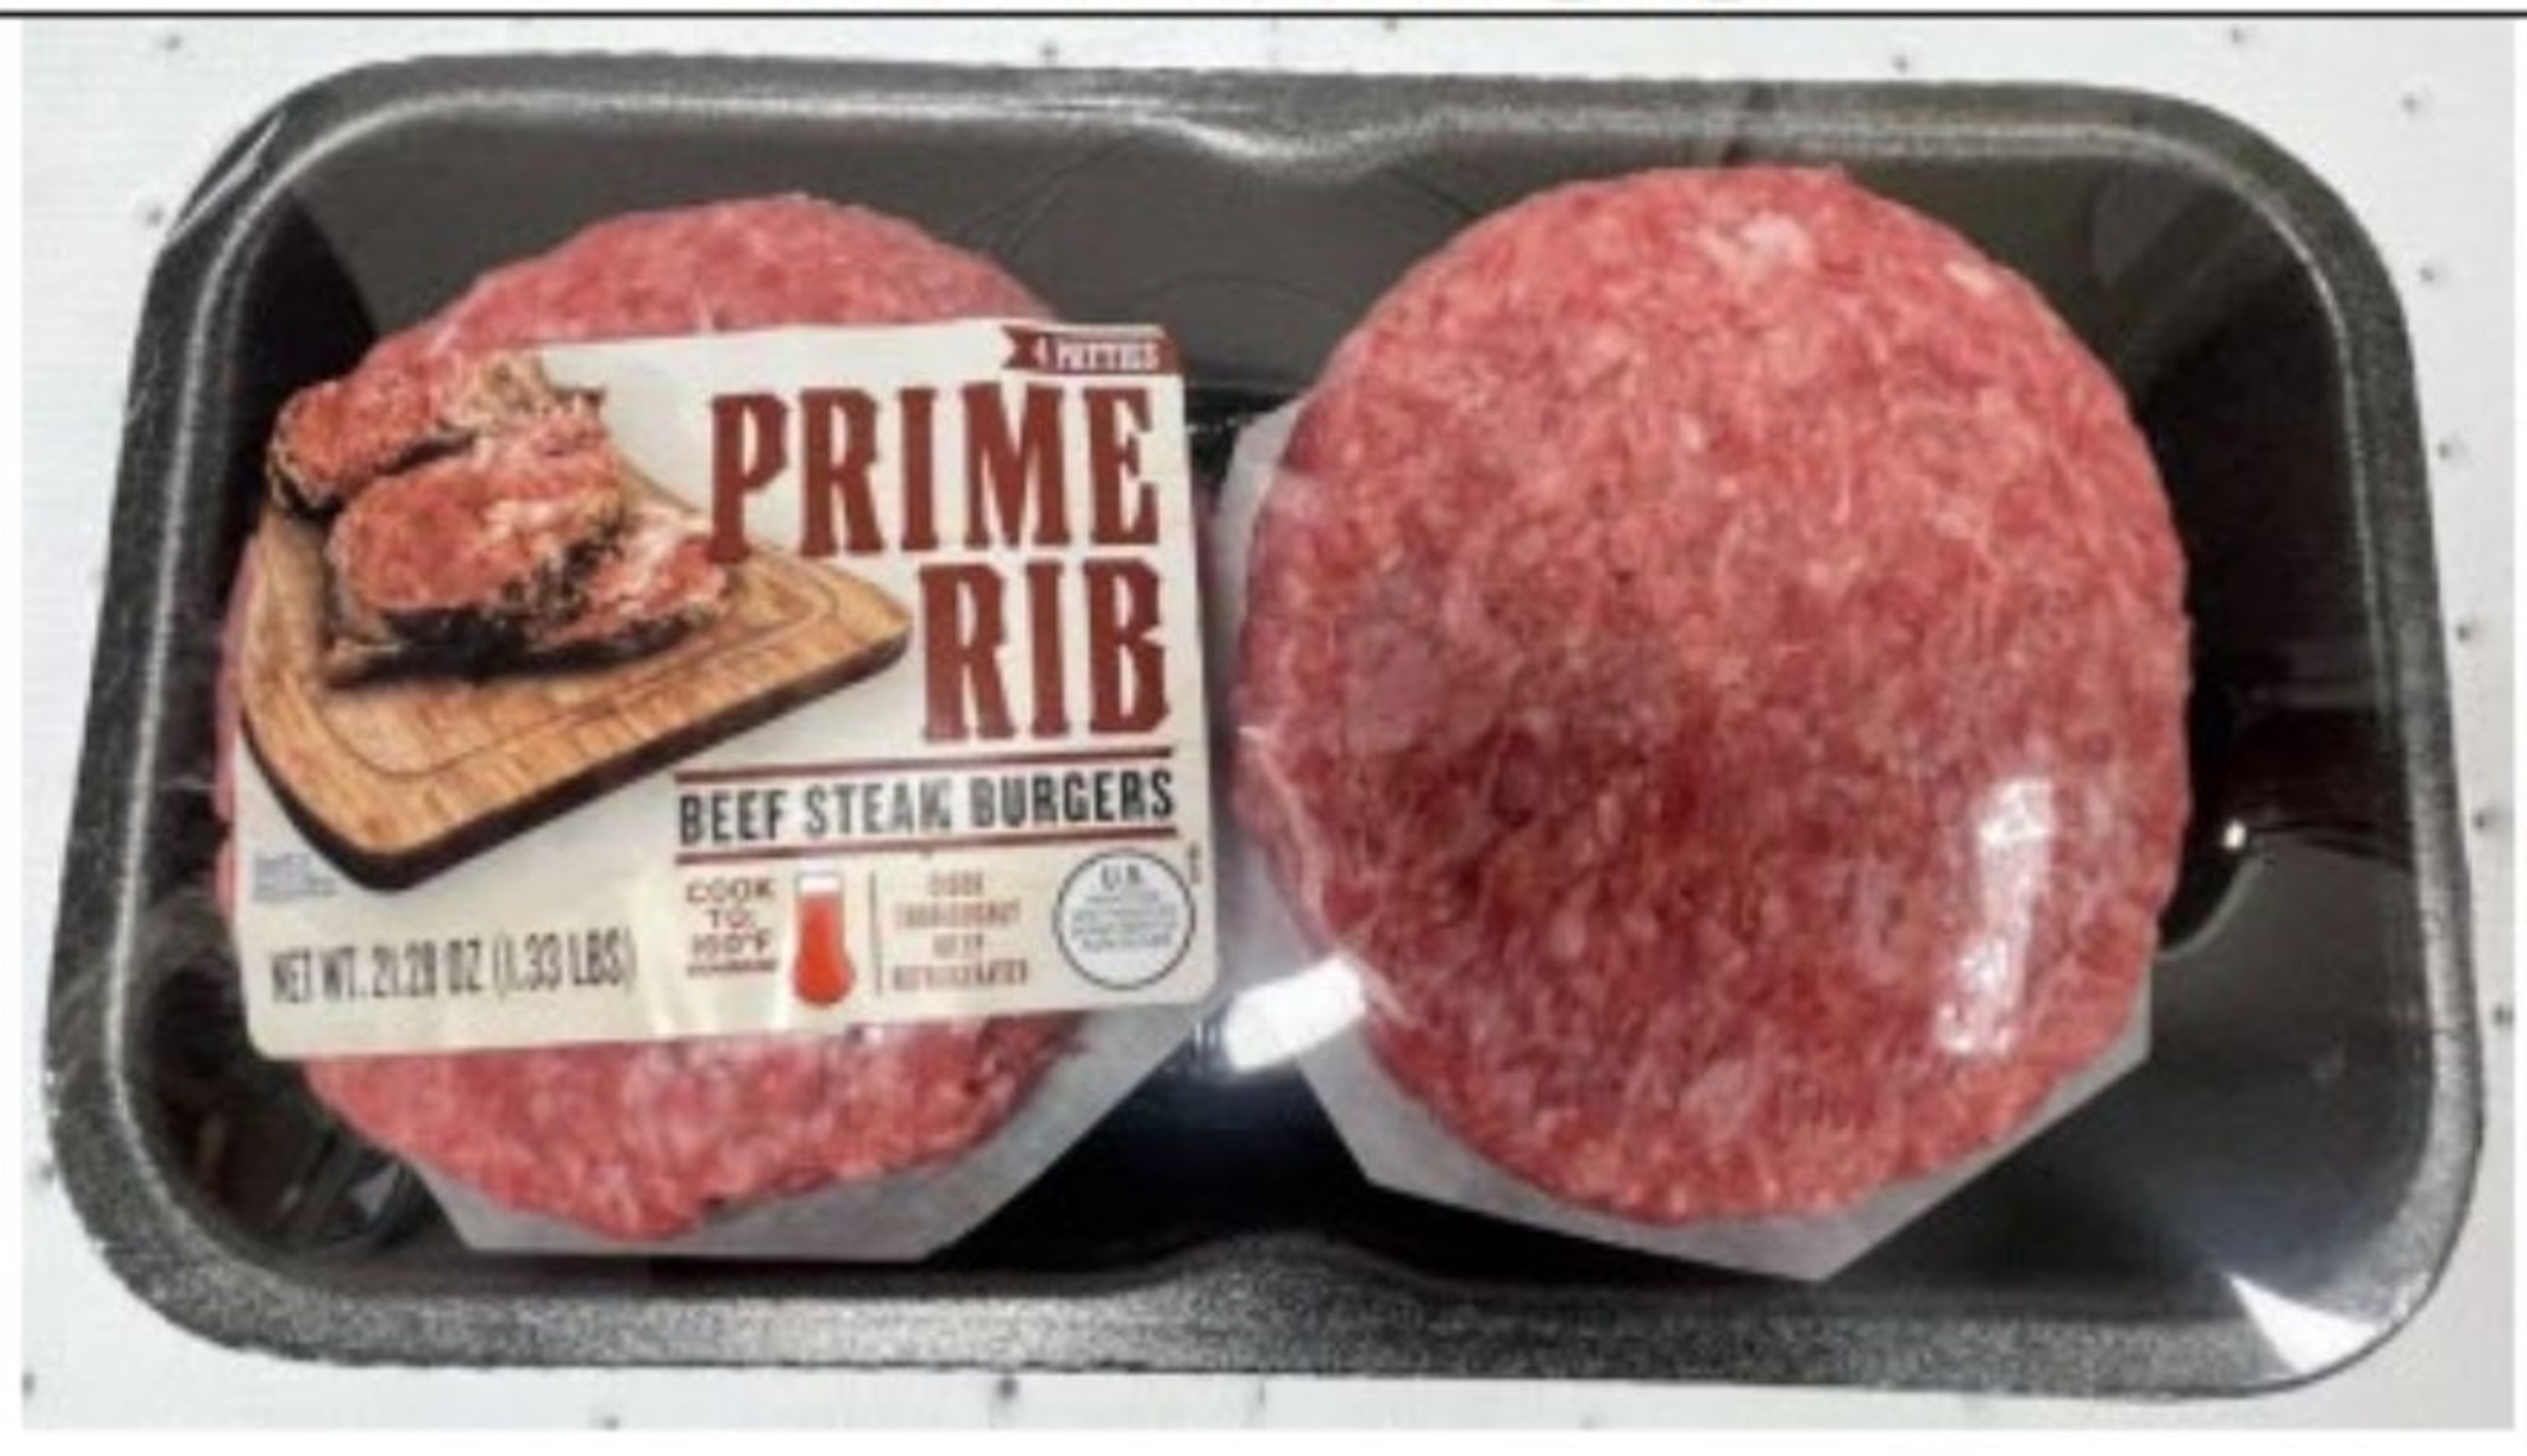 PHOTO: Cargill Meat Solutions recalled more than 16K pounds of raw ground beef products that may be contaminated with E. coli.